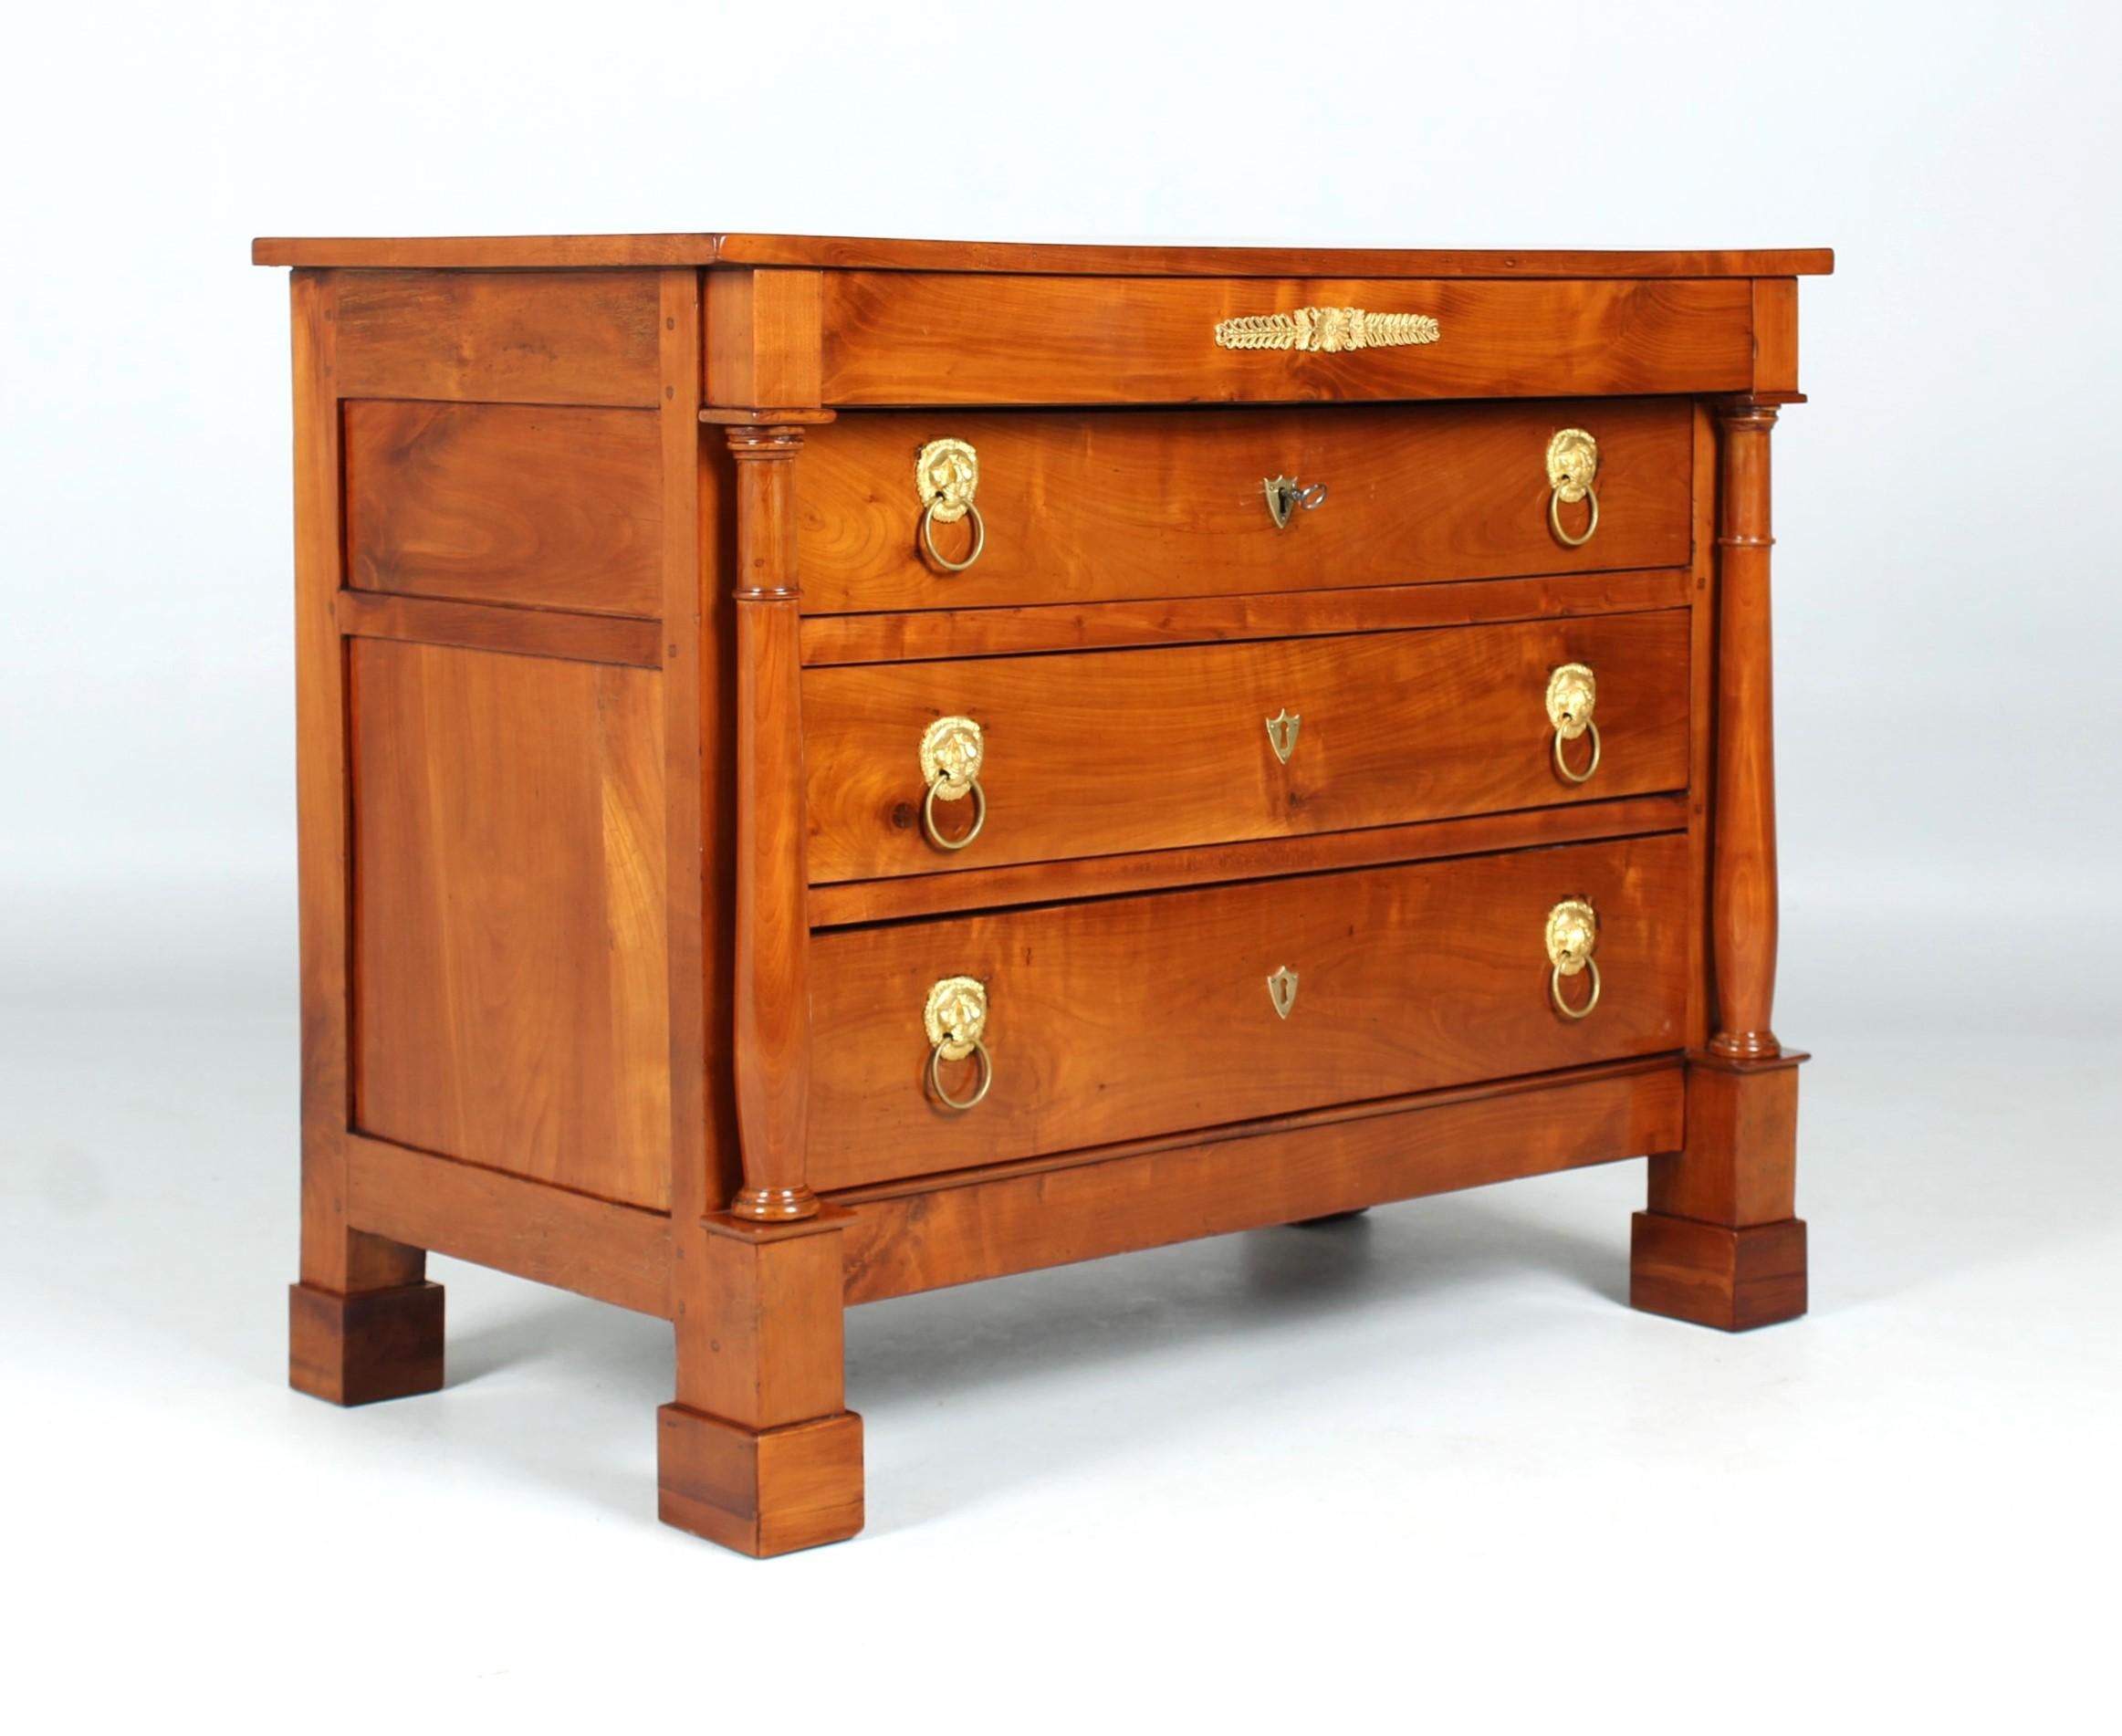 Cherry 19th Century French Chest Of Drawers with Columns and Firegilt Fittings, c. 1830